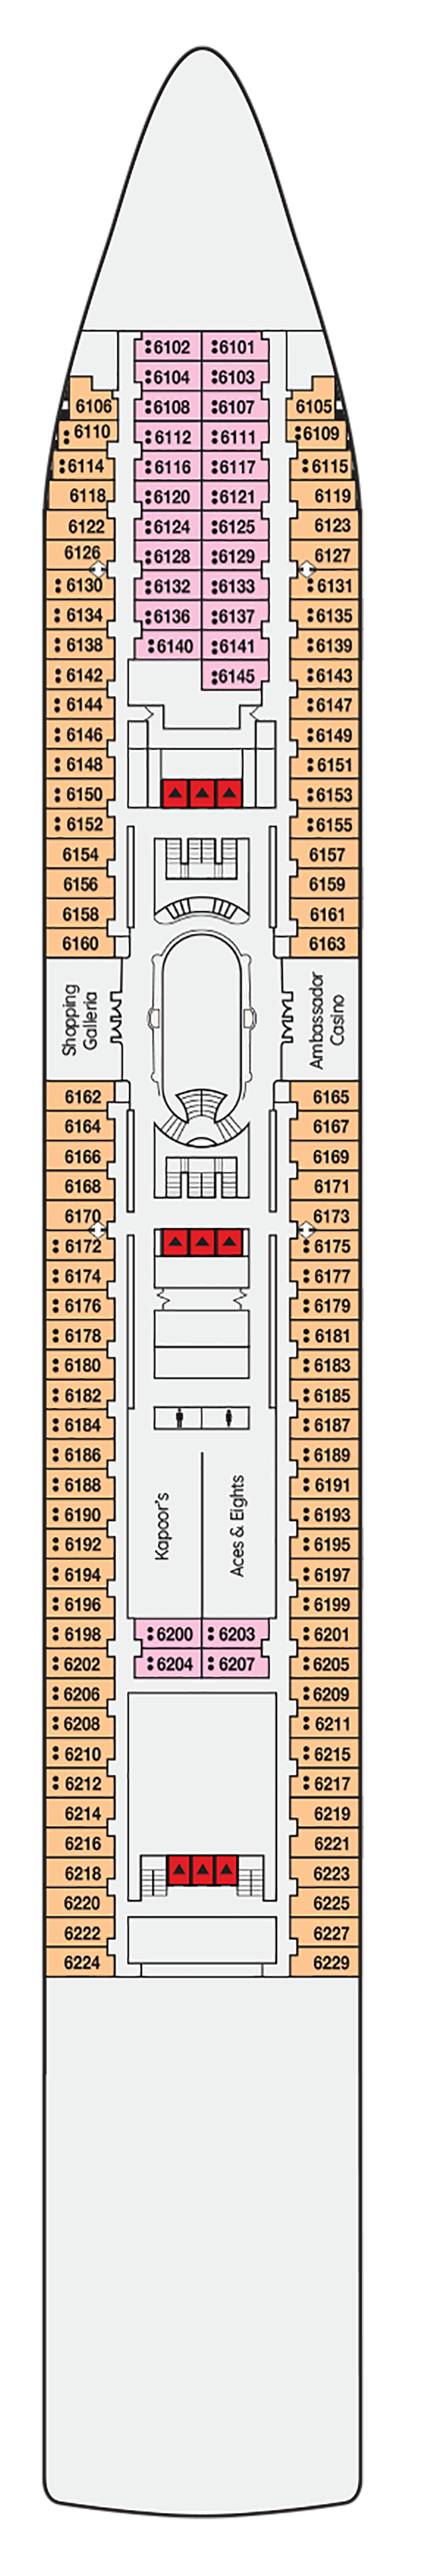 Ambience Deck Plans Planet Cruise 5773